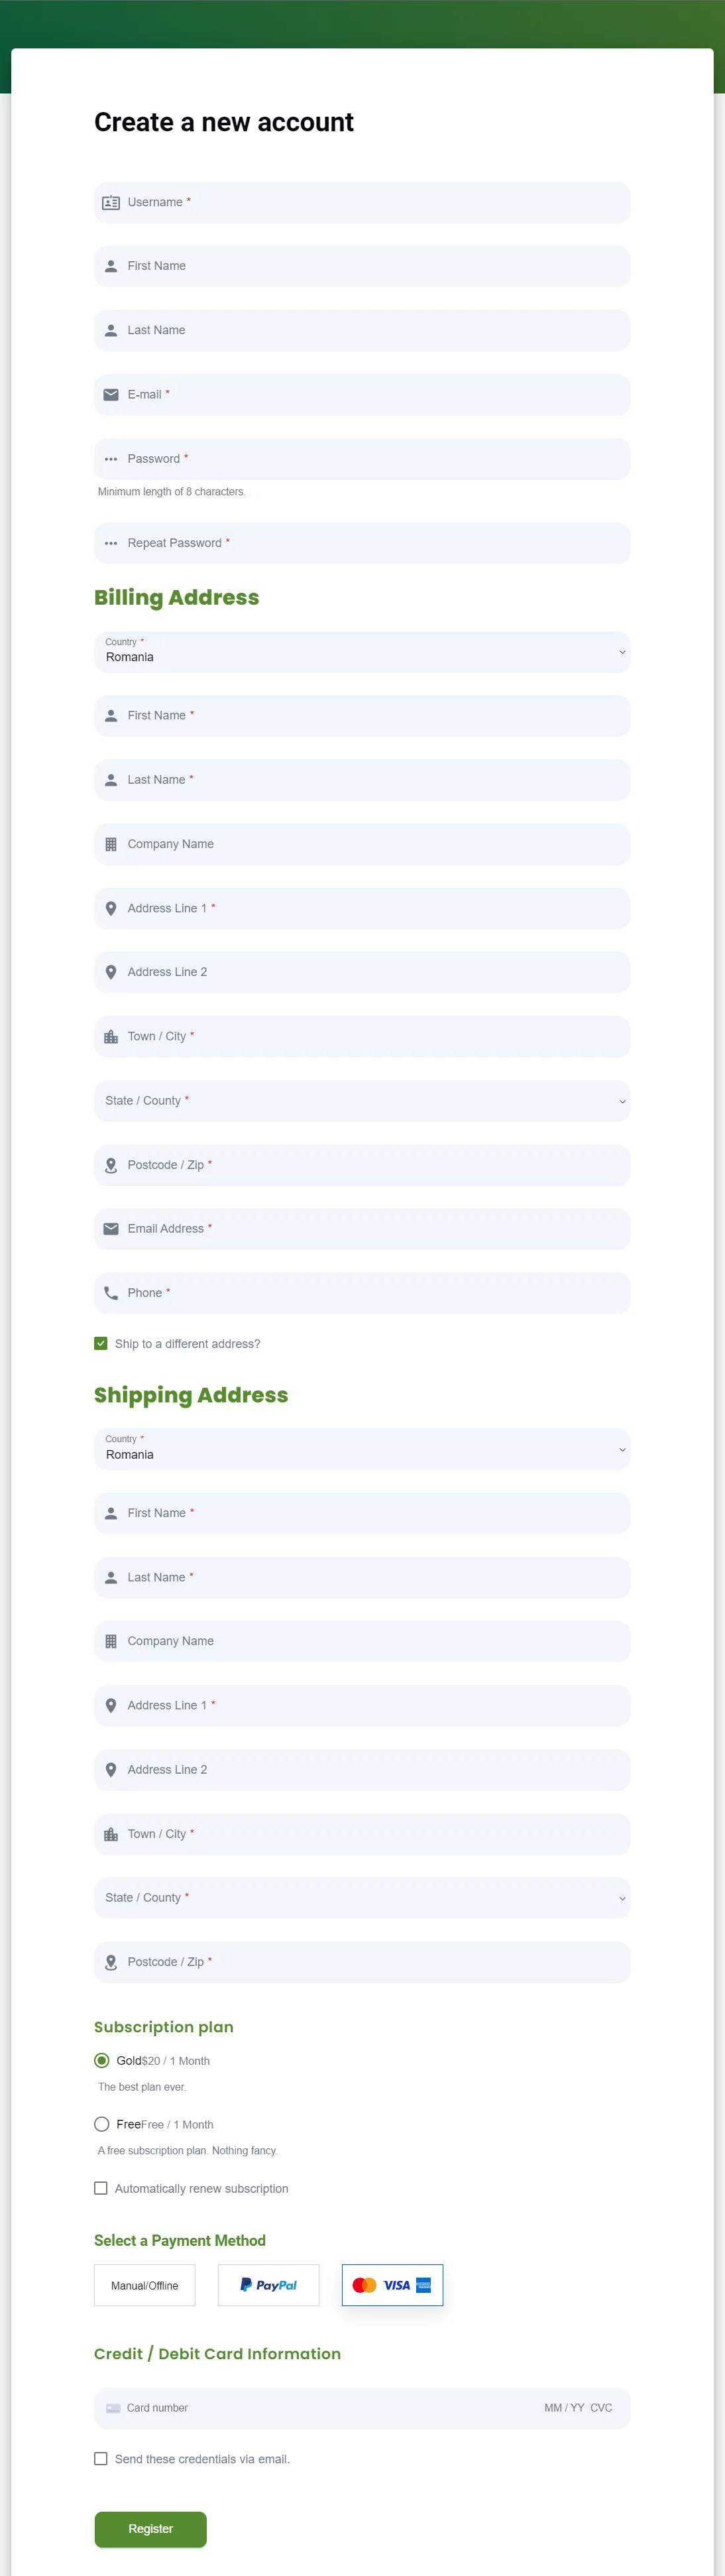 Profile Builder WooCommerce form with payment